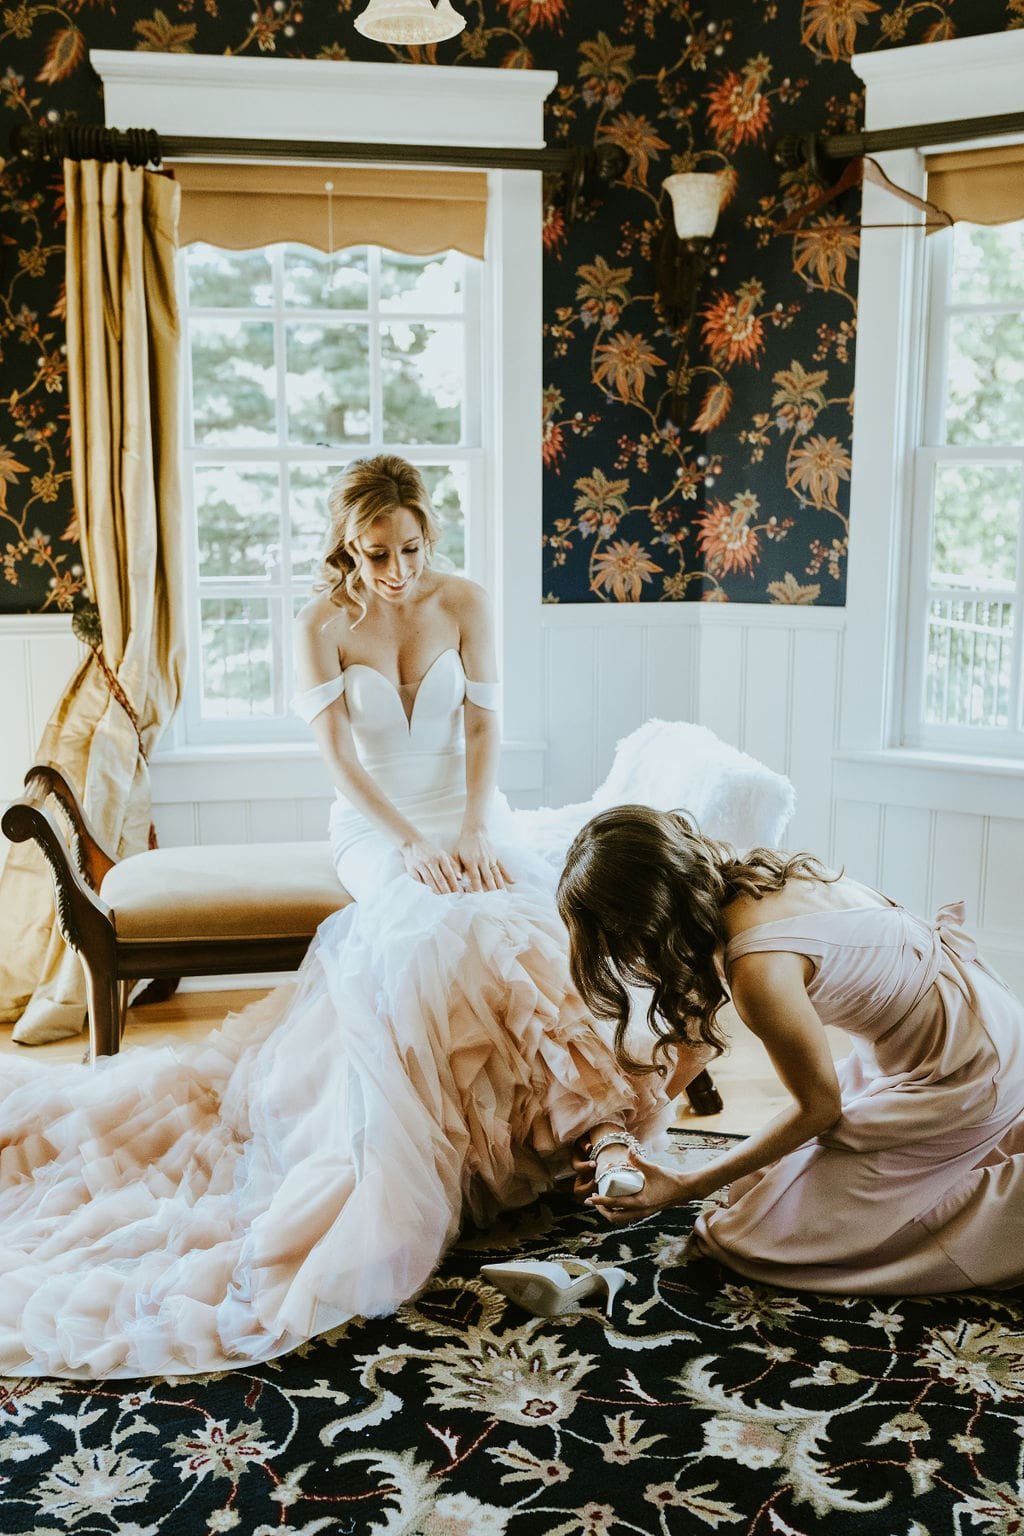 Bridesmaid helping put shoes on bride while getting ready for classic wedding